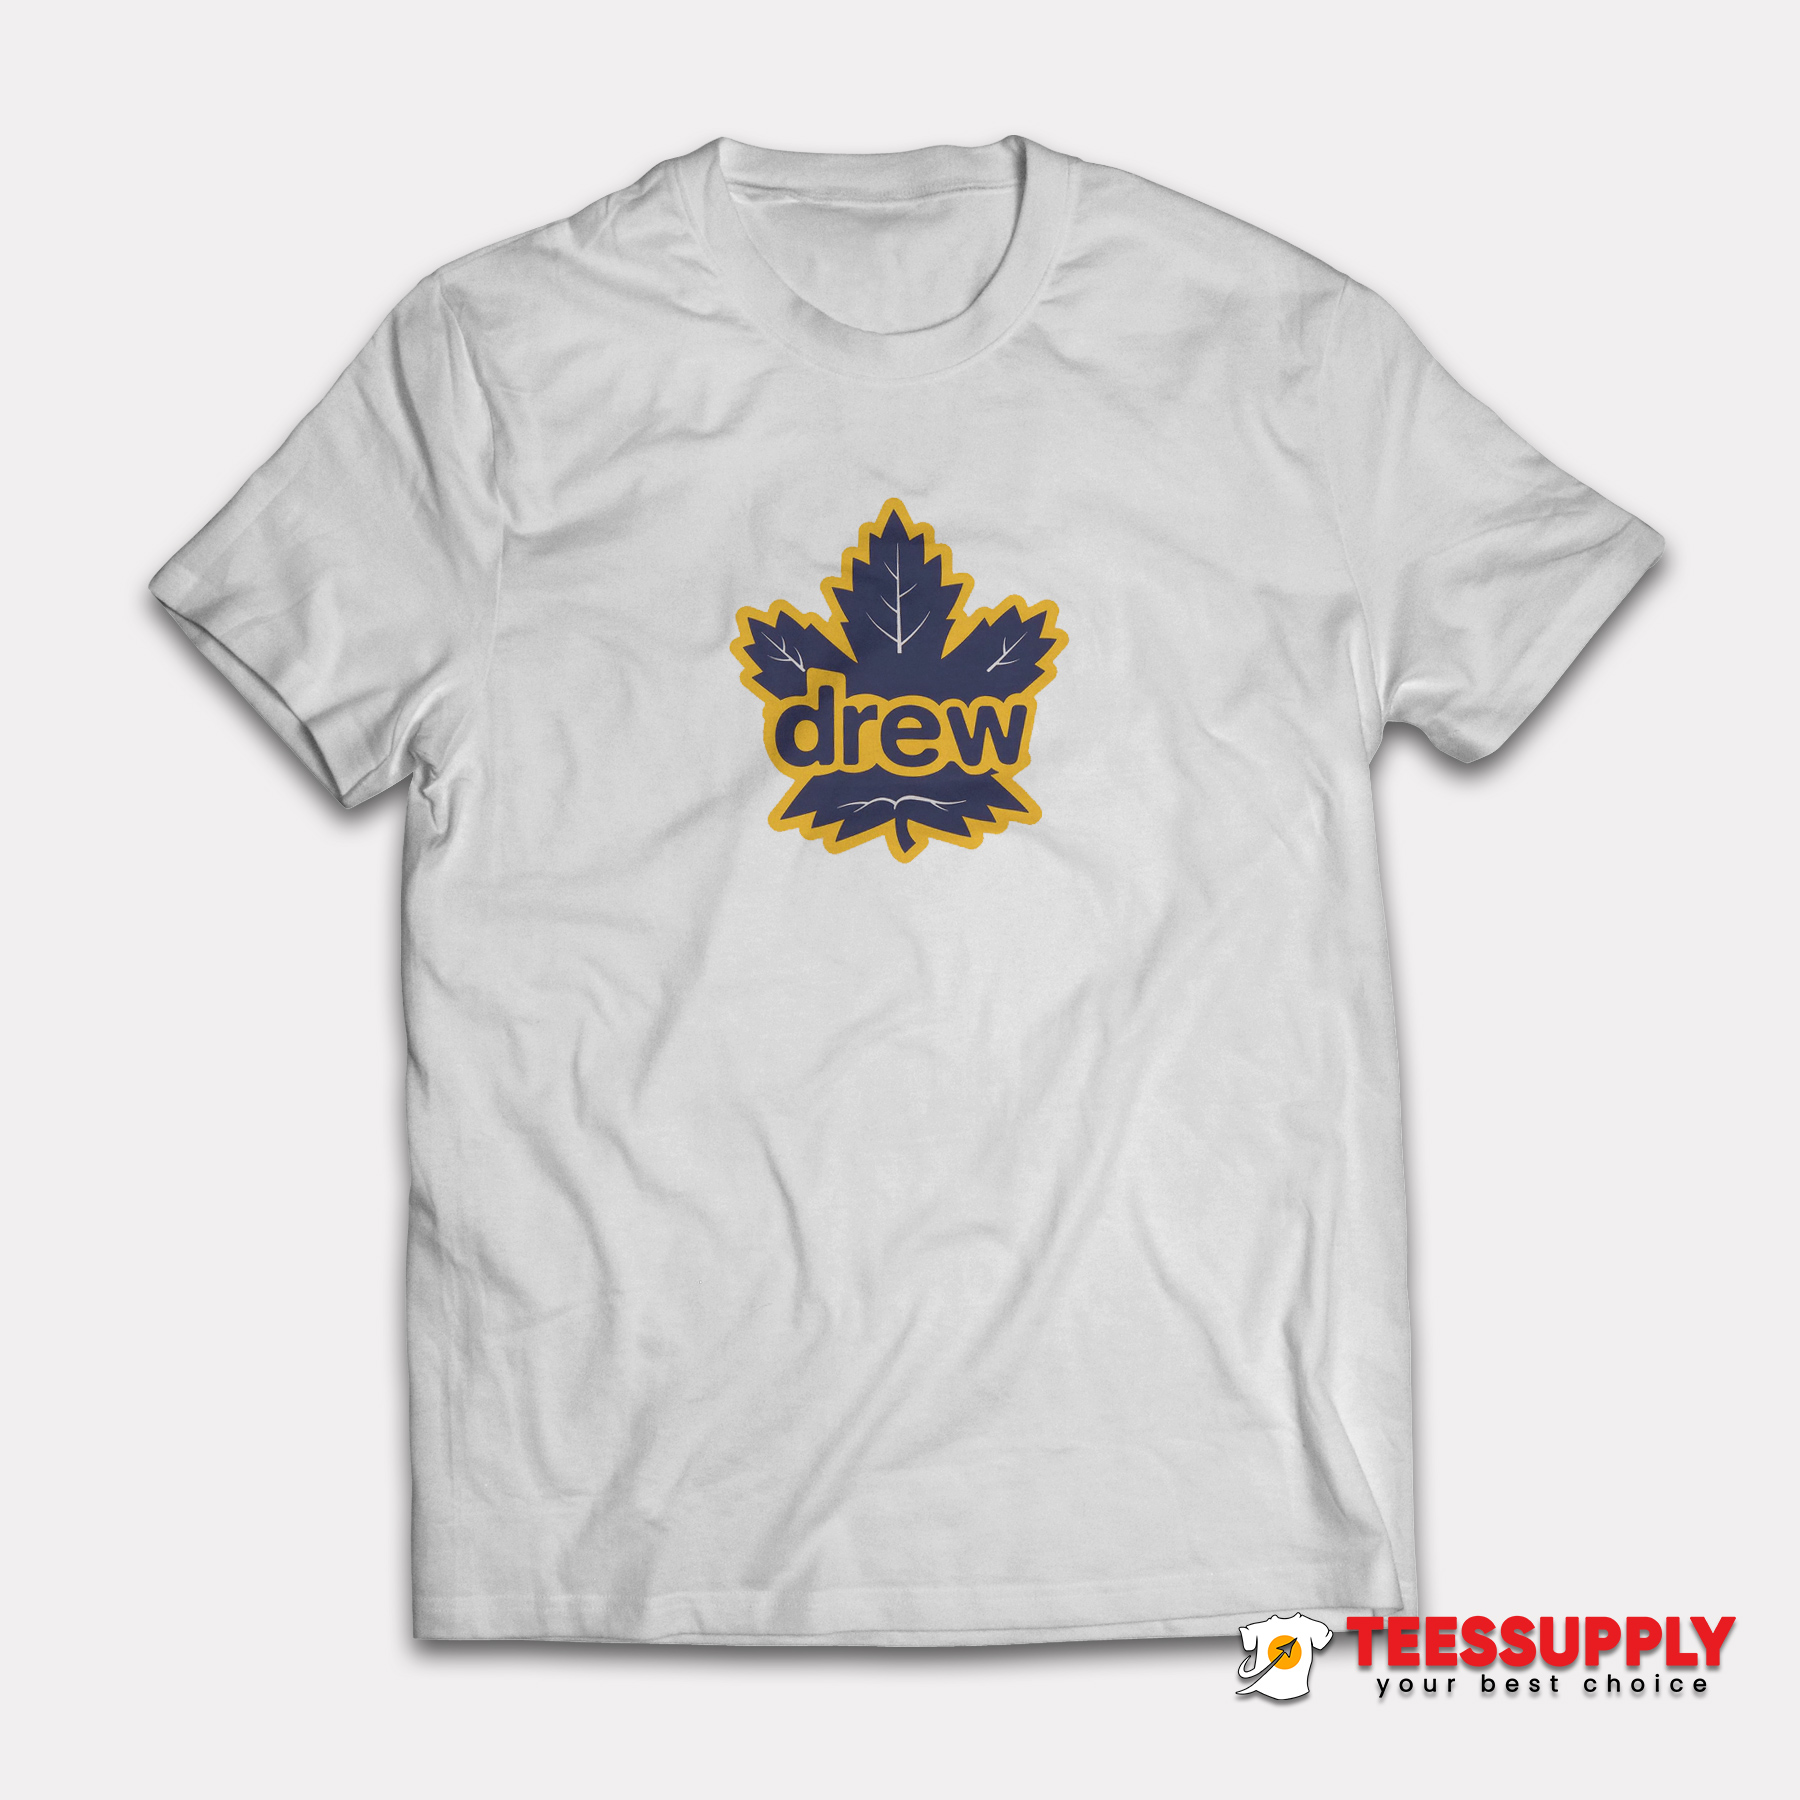 Toronto Maple Leafs x Drew House T shirt 2022 collection. WHITE T